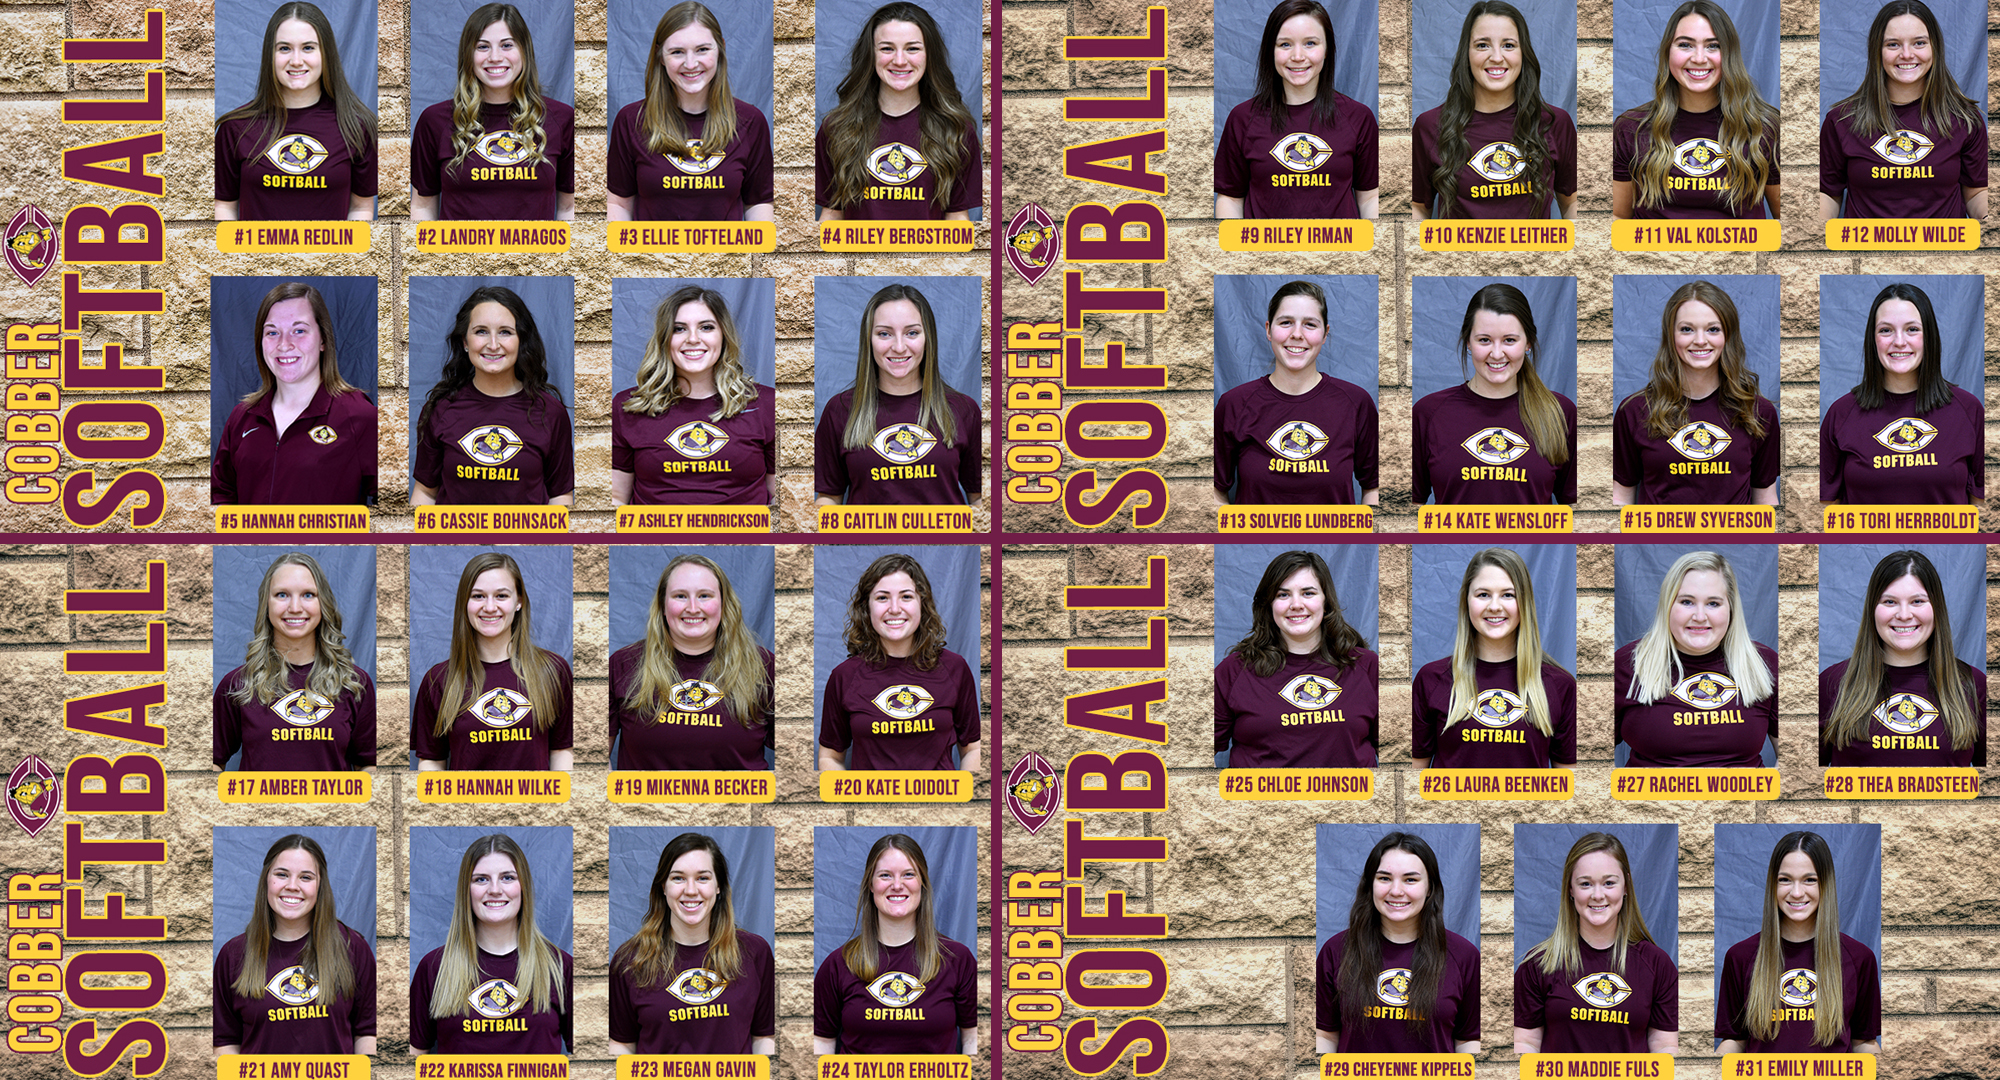 The 2021 Cobber softball team features eight seniors and 10 first-year players. They start their season on Friday, Mar. 5.